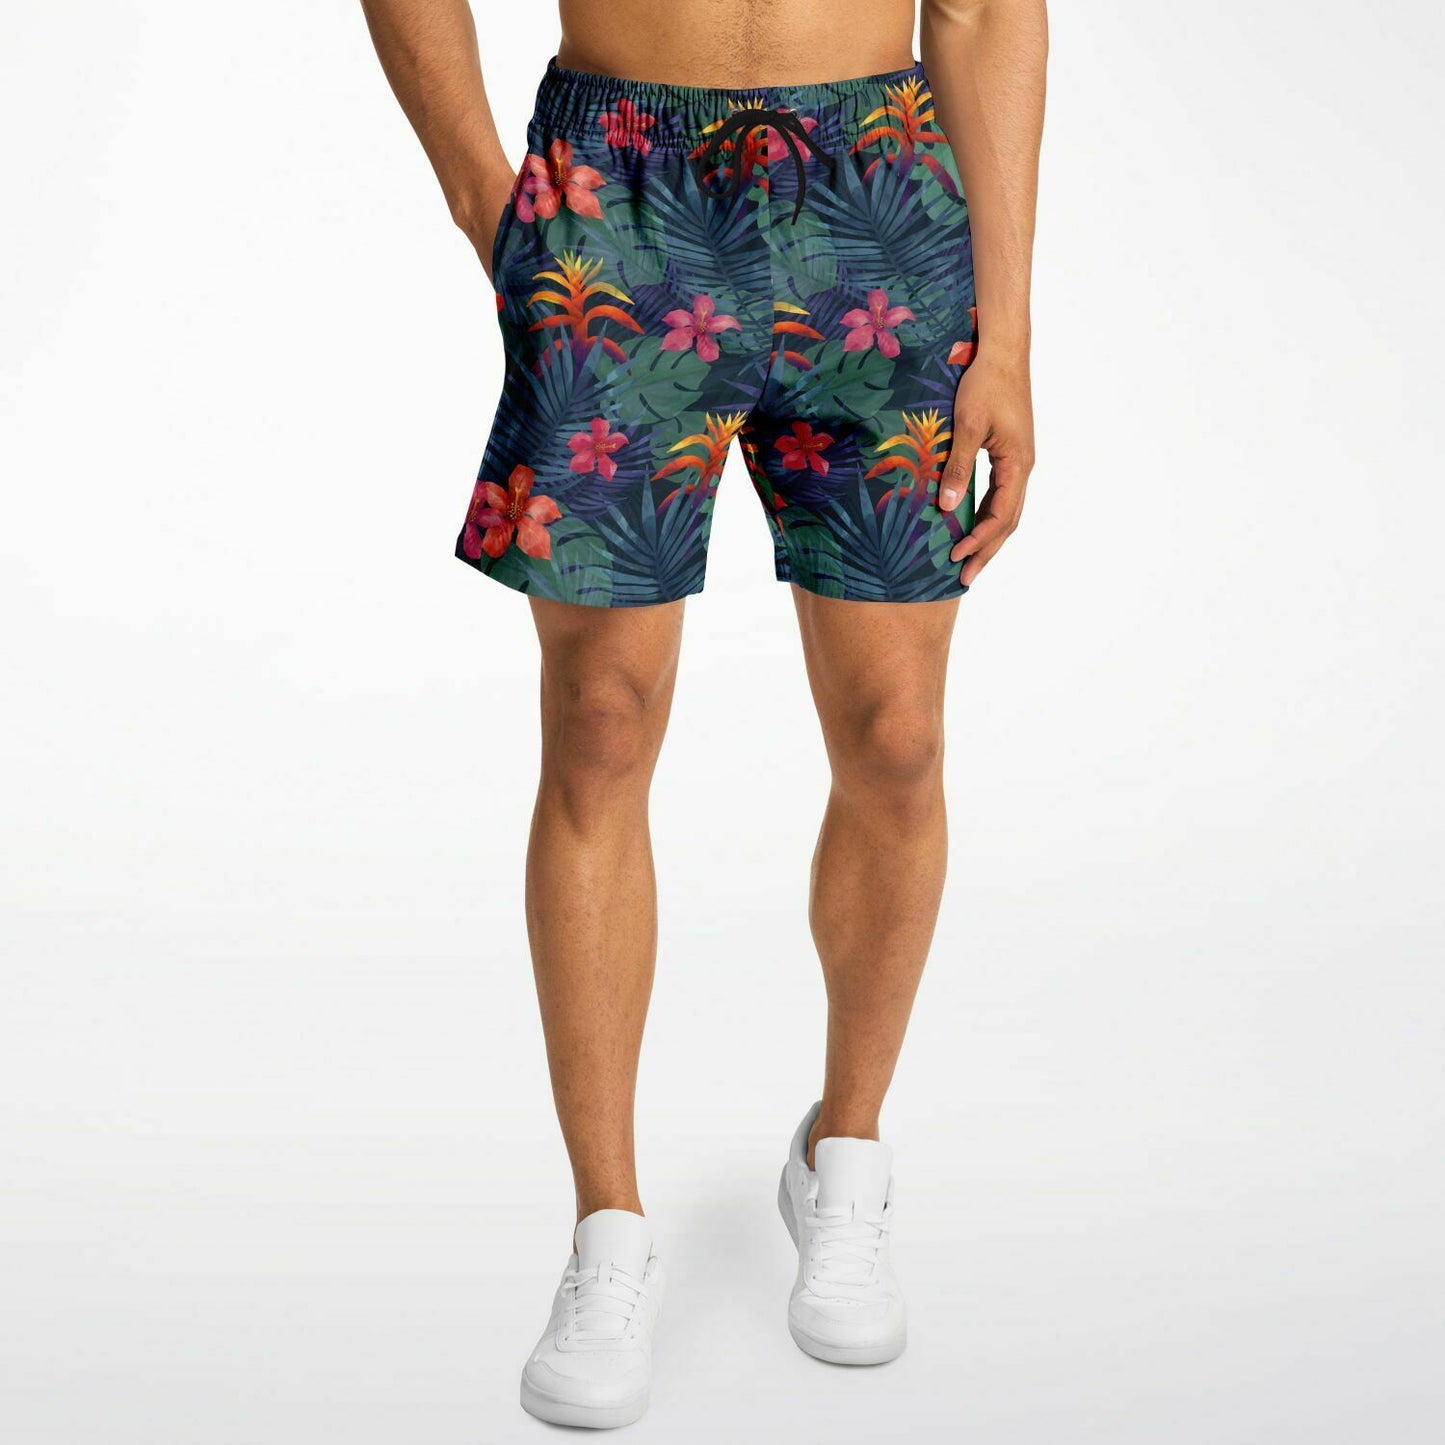 Tropical Men Mid Length Shorts, Jungle Flowers Green Leaves Beach Casual with Pockets Drawstring Casual Designer Plus Size Summer Shorts Starcove Fashion